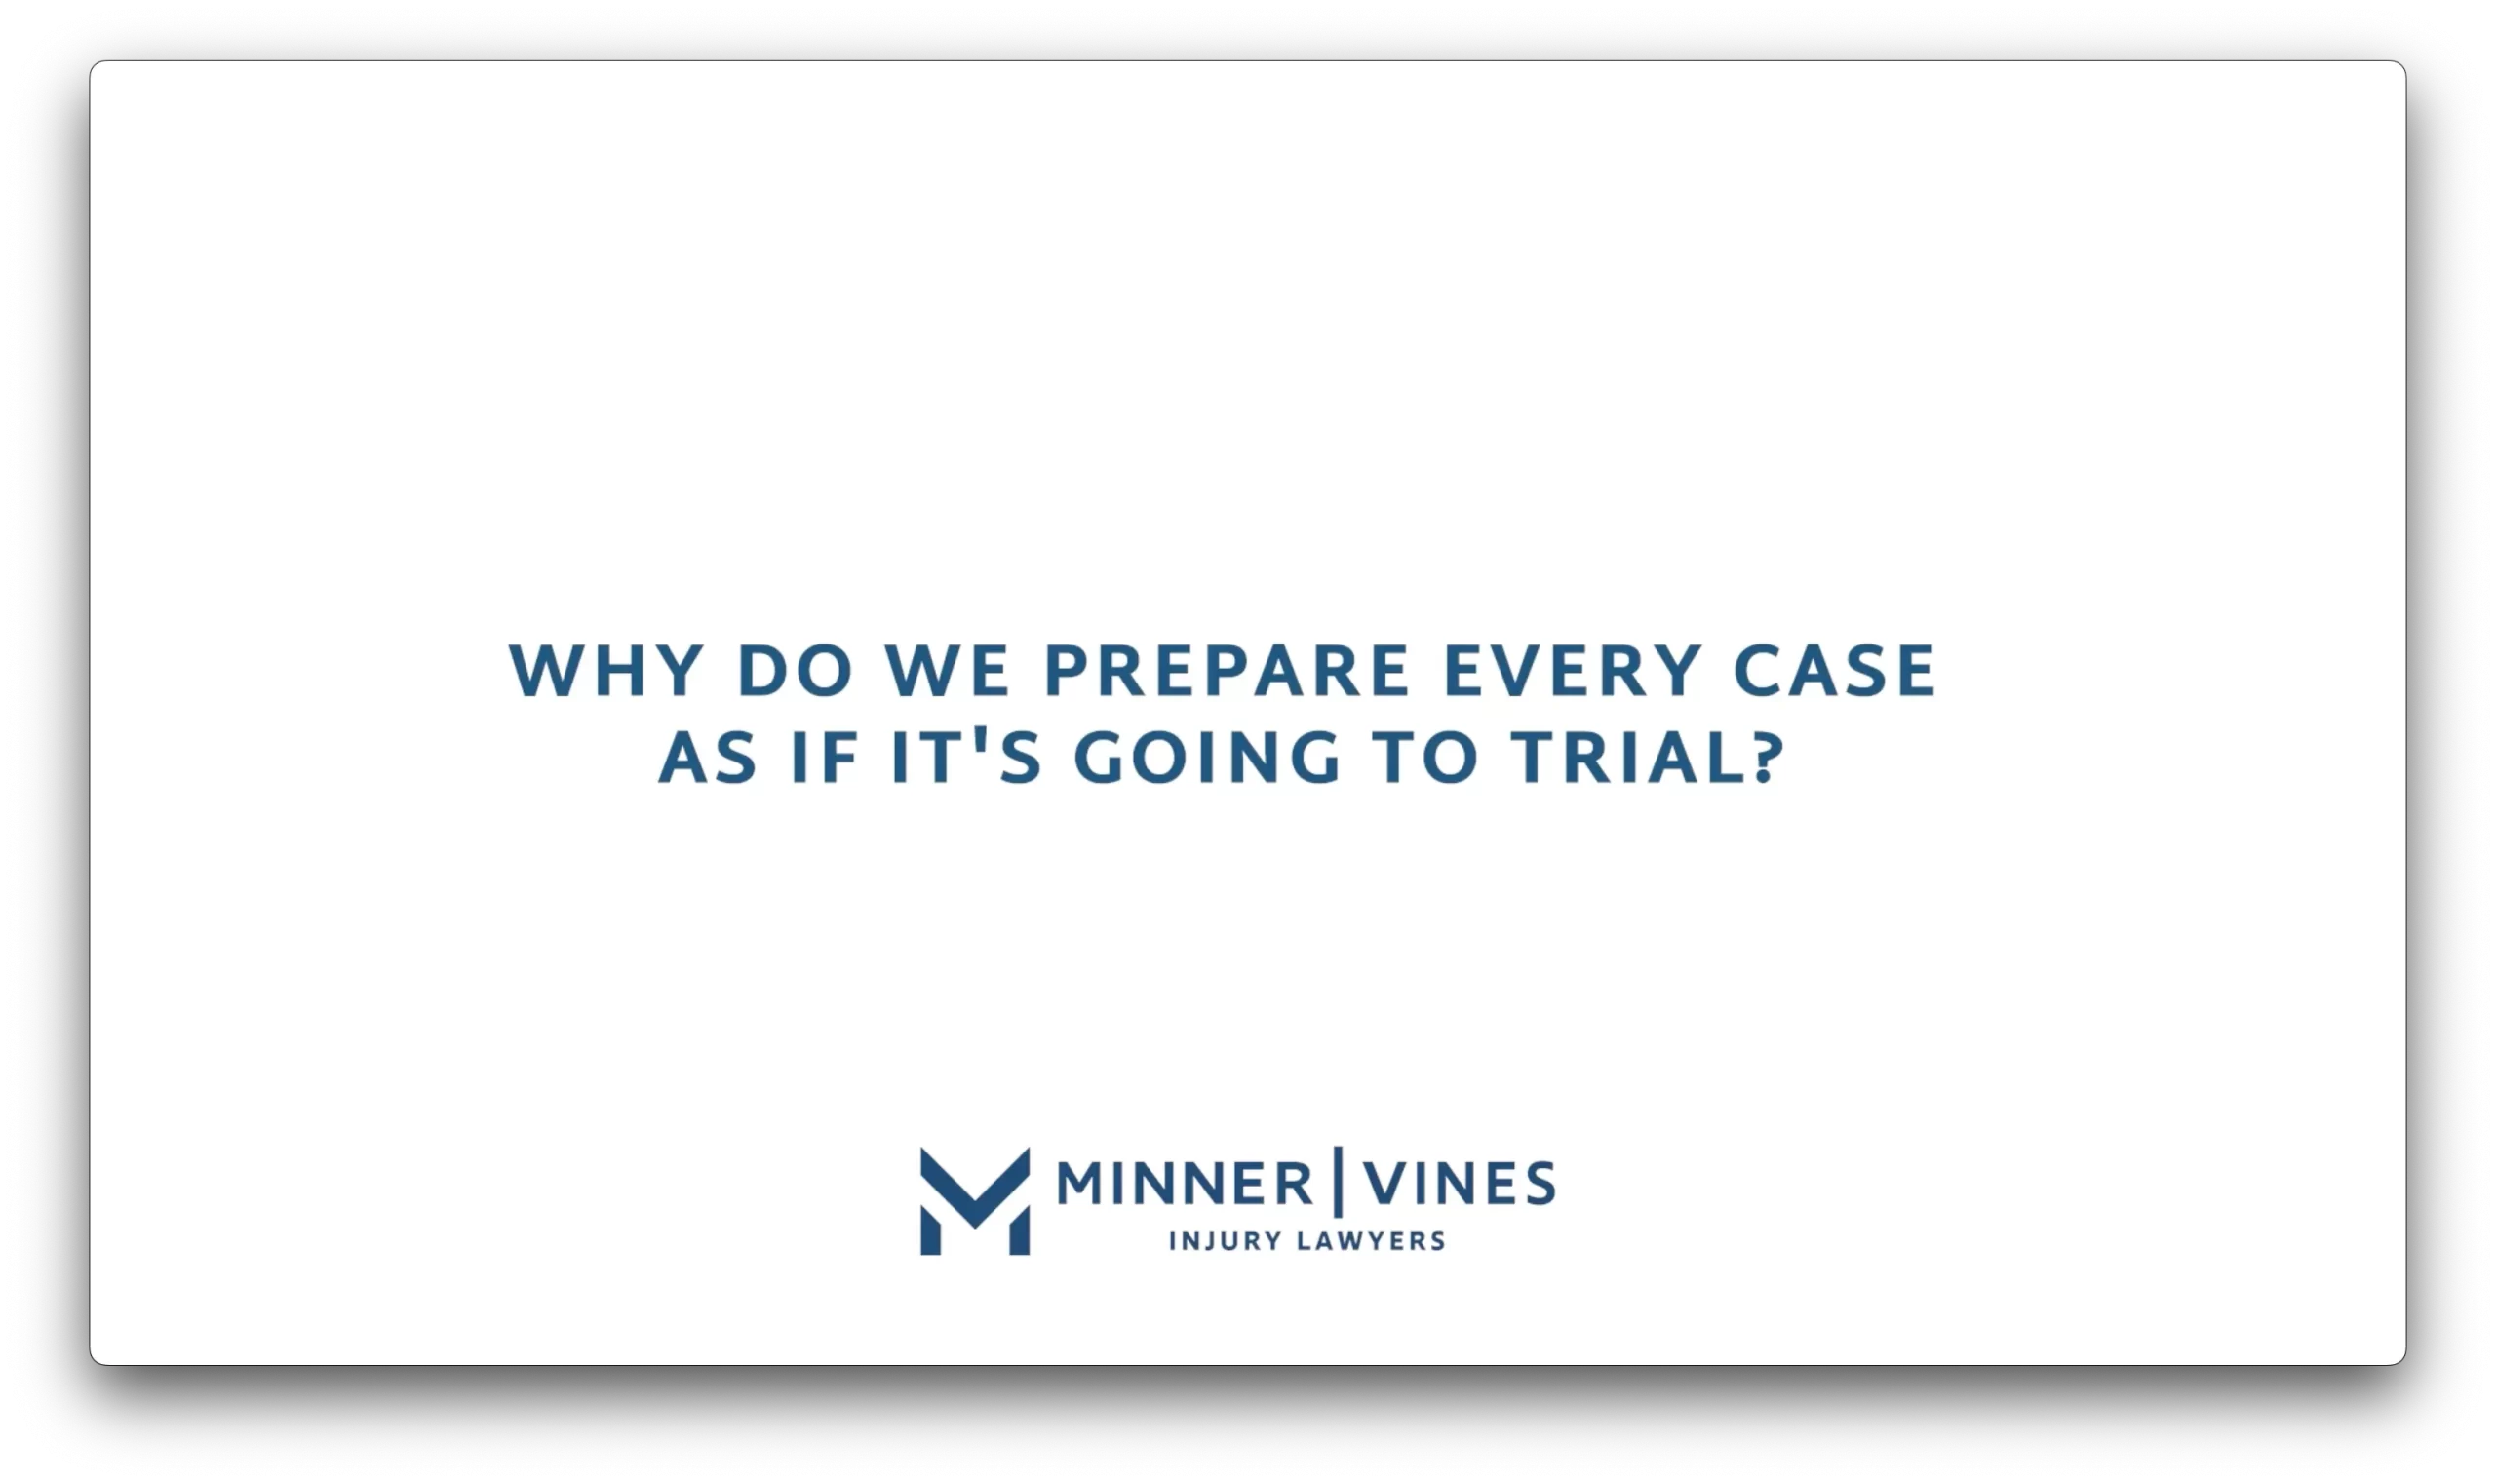 Why do we prepare every case as if it’s going to trial?